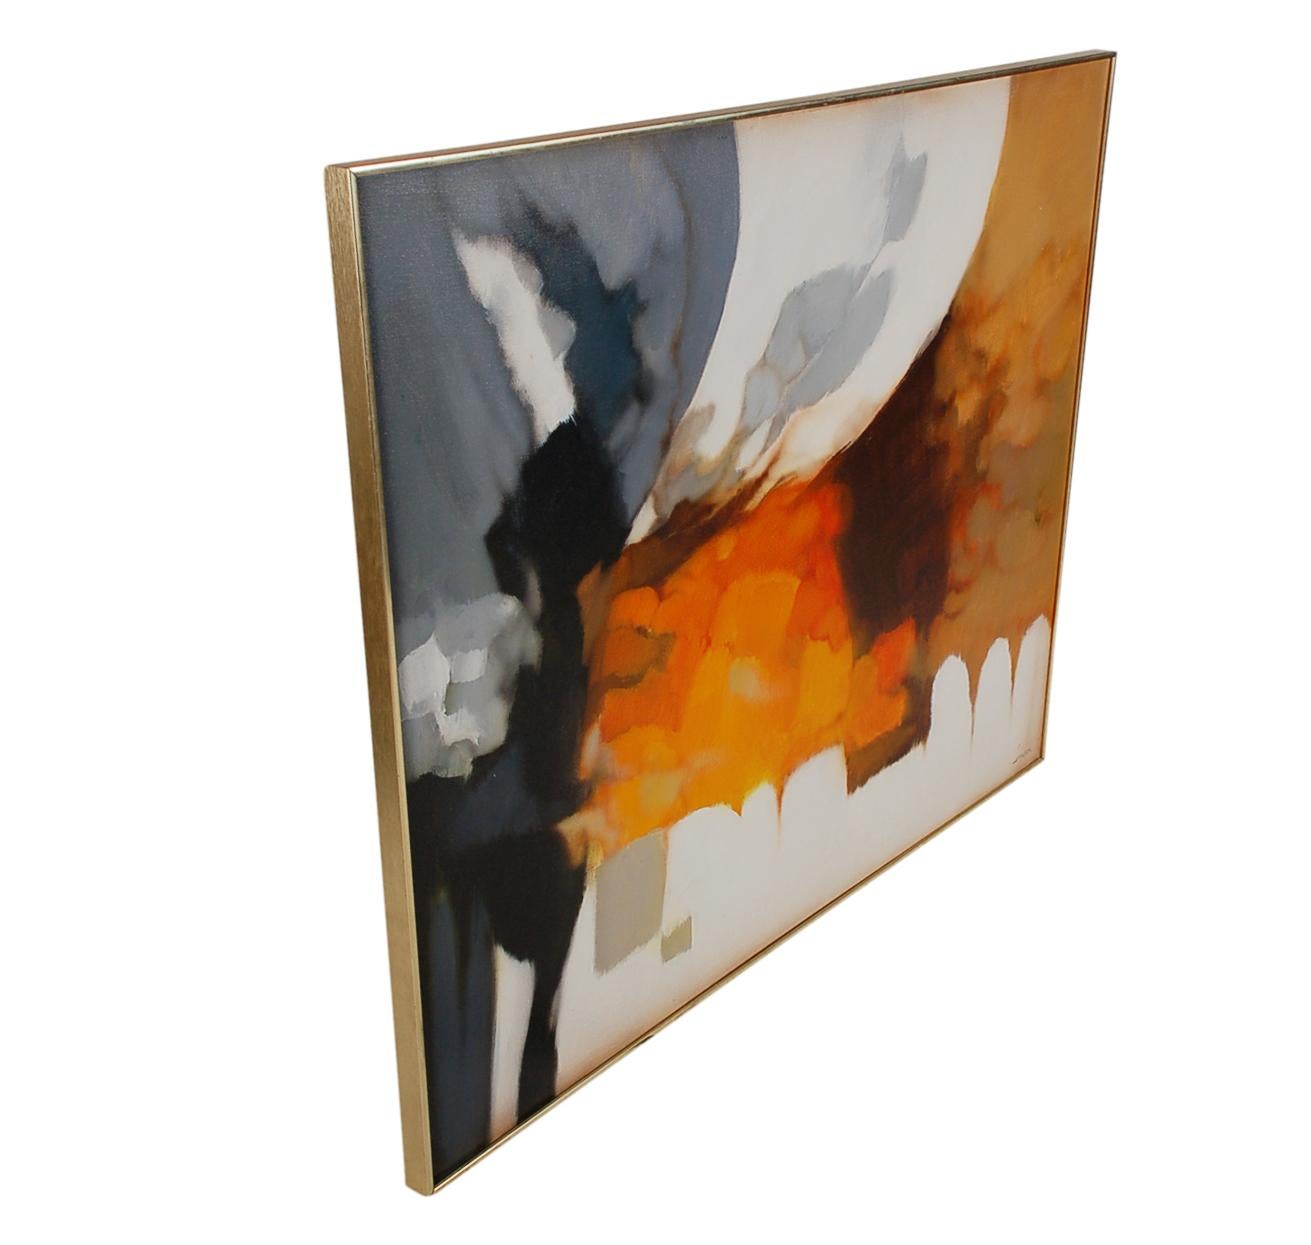 A large oil on canvas circa late 1960s or 1970s painted by Robert Lawson. This large abstract has a beautiful midcentury color palette and original brass frame.